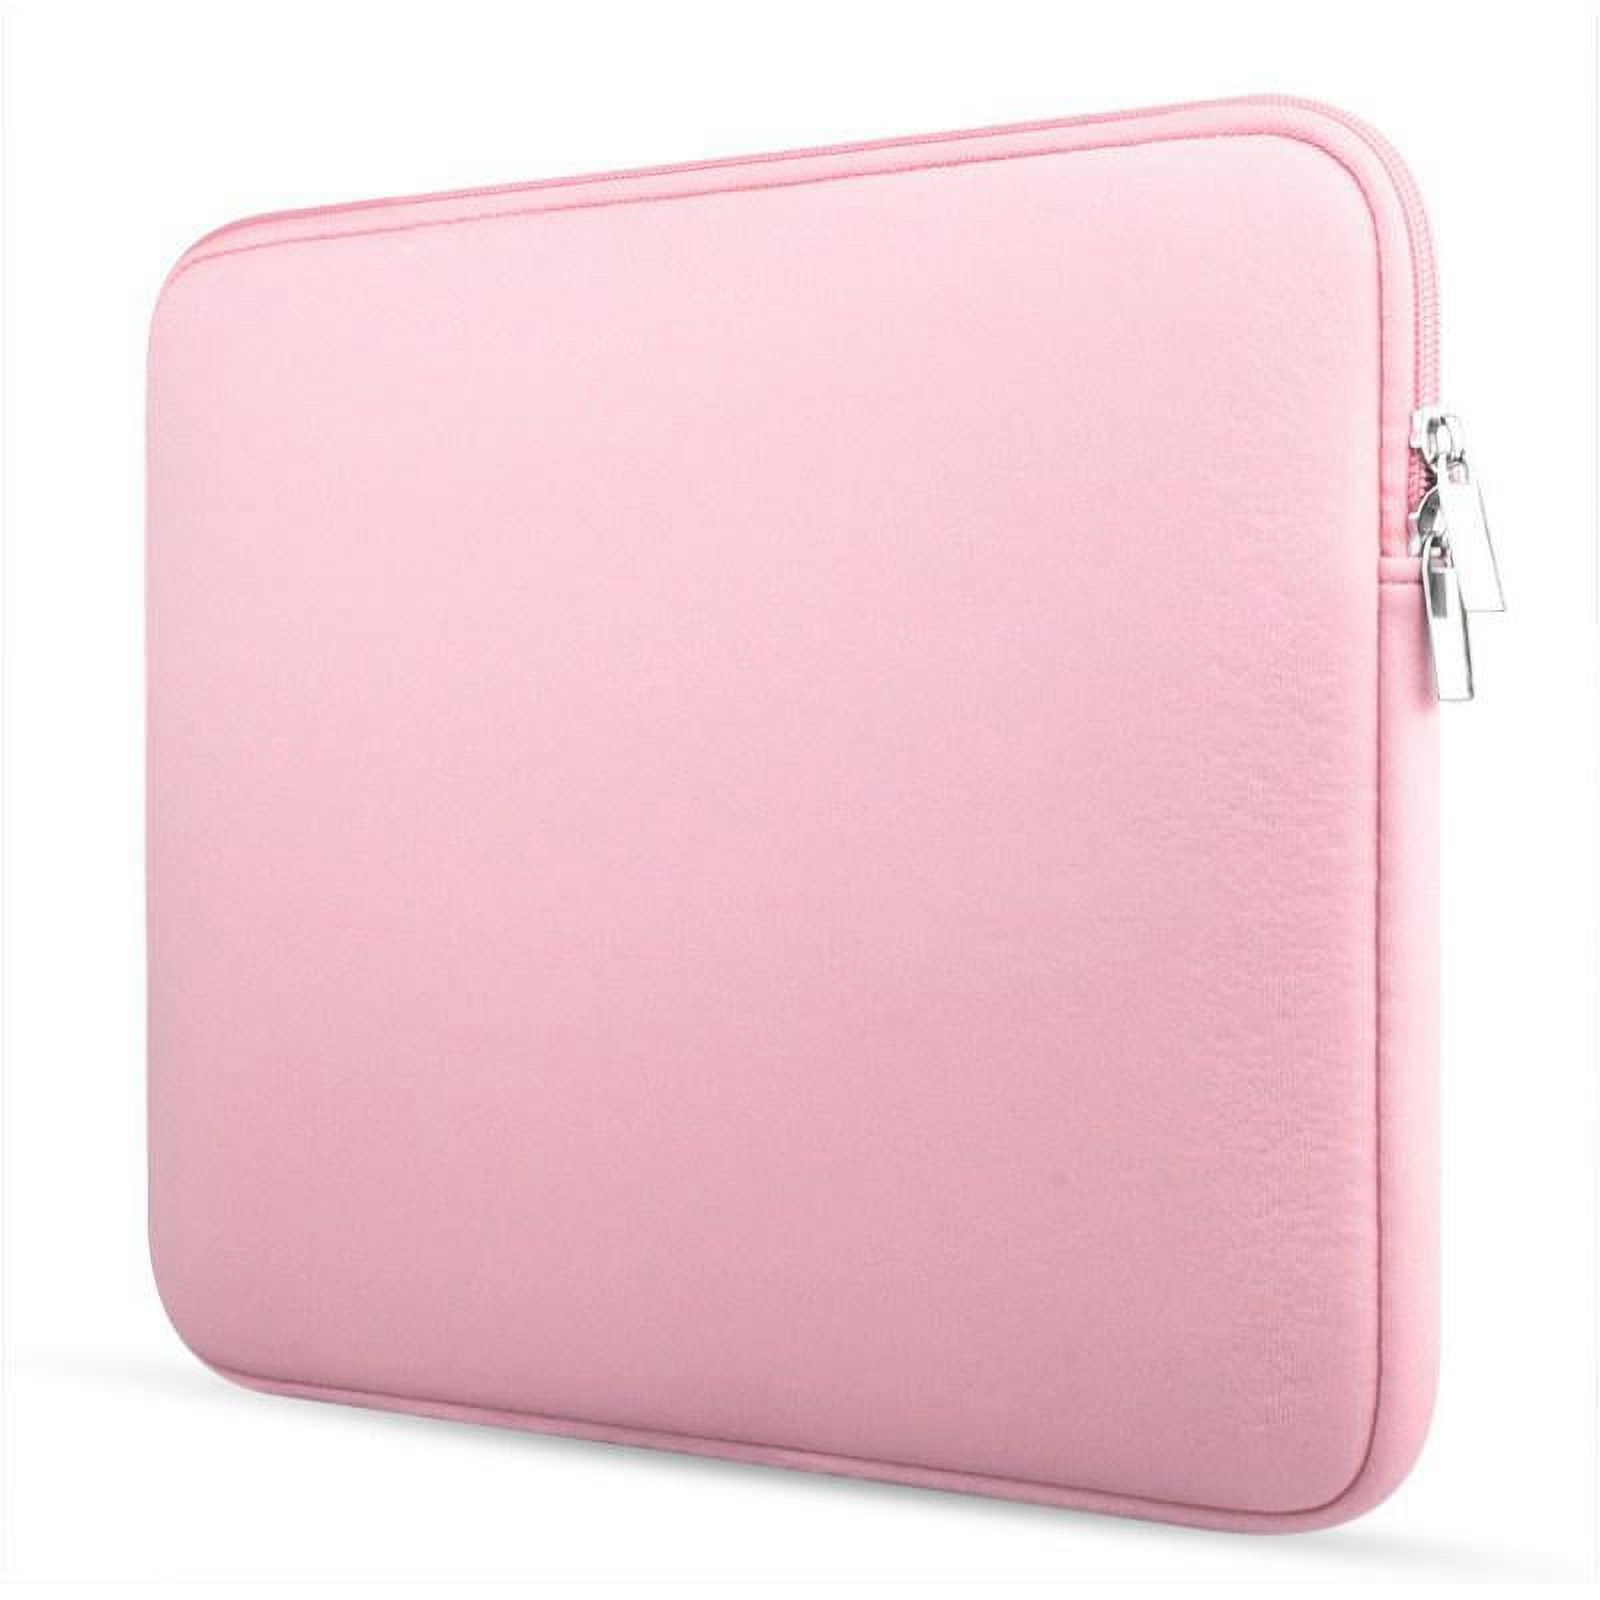 13 Inch Laptop Sleeve 13 Inch Computer Bag 13 inch Netbook Sleeves 13 inch Tablet Carrying Case Cover Bags 13" Notebook Skin Neoprene, Pink - image 4 of 9